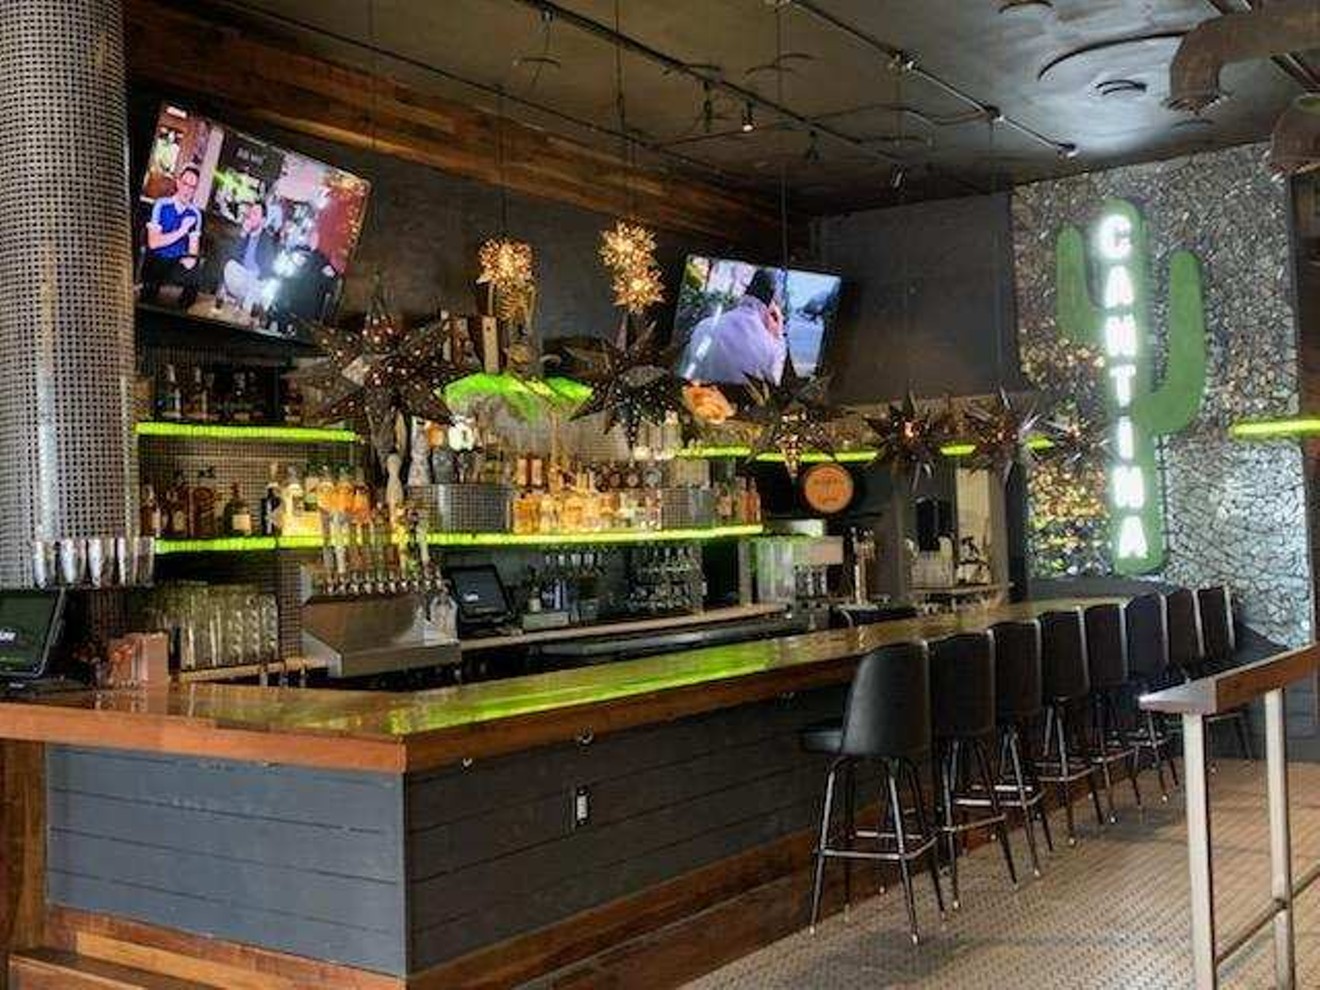 Lime's new bar glows green in the former home of Gozo.